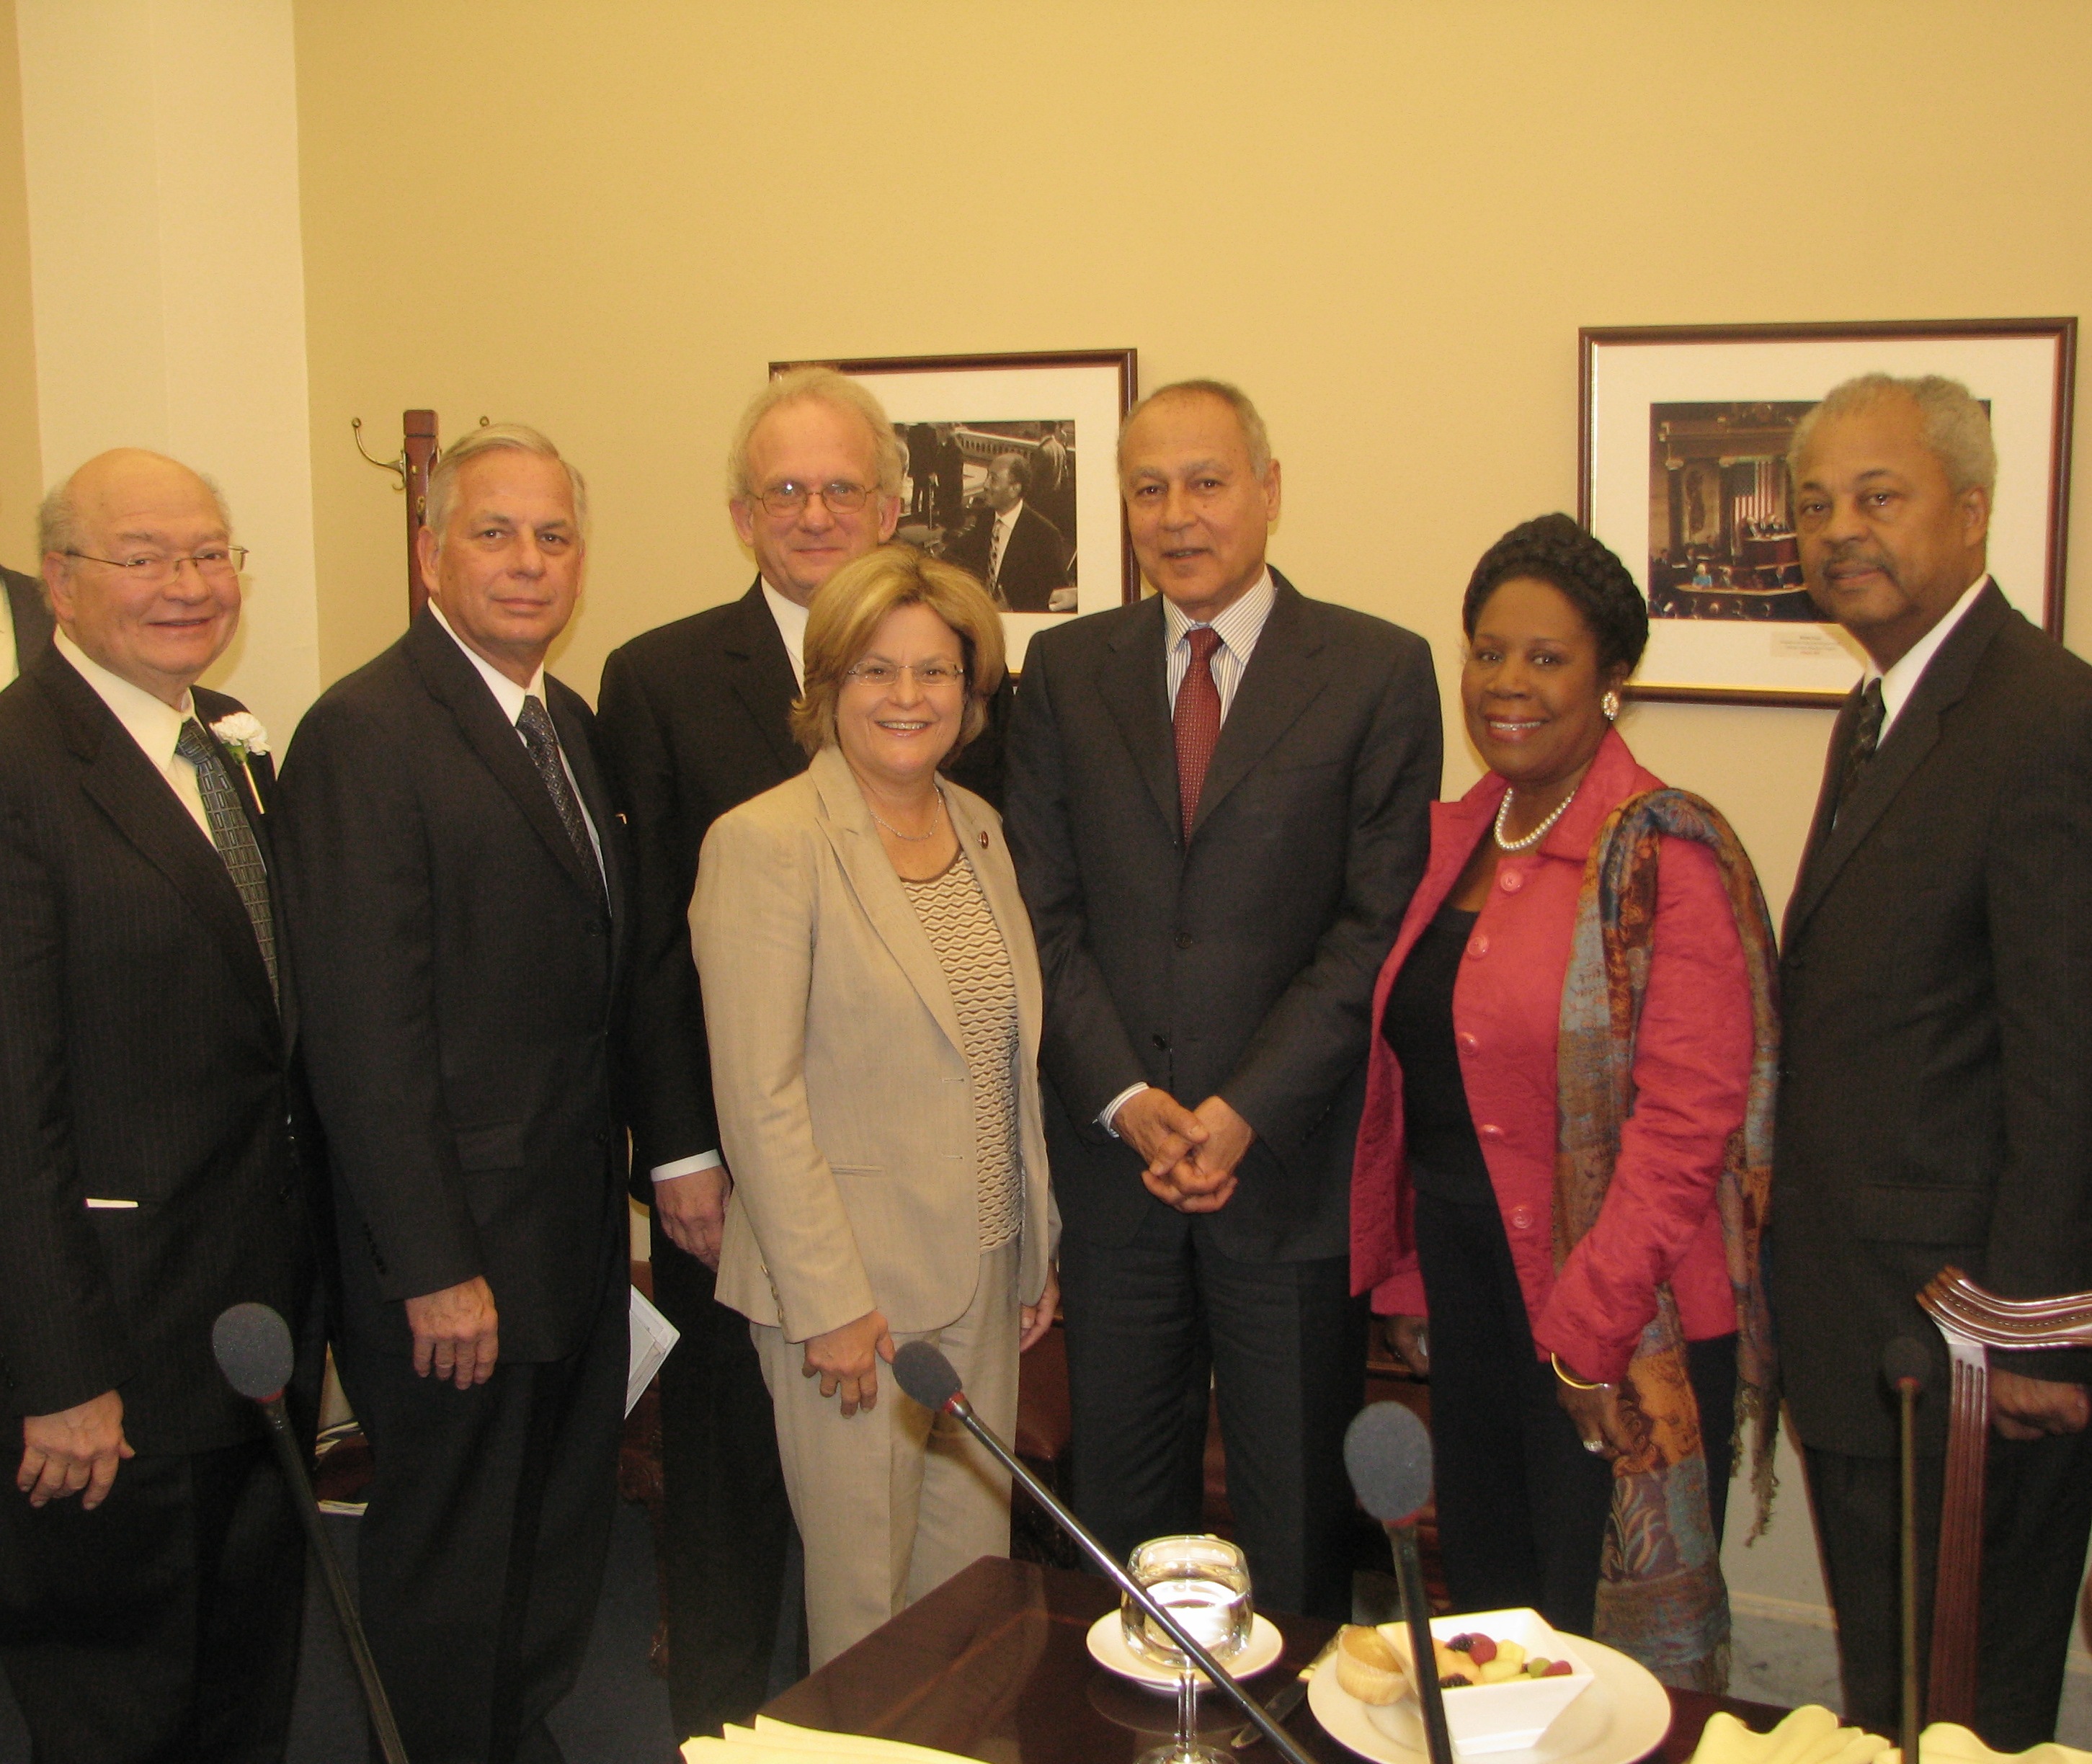 Ranking Member Ros-Lehtinen, Chairman Howard Berman, and fellow Committee Members Rep. Gary Ackerman, Rep. Gene Green, Rep. Sheila Jackson Lee and Rep. Donald M. Payne  stand with Egyptian Foreign Minister Ahmed Aboul Gheit following a meeting in the U.S. Capitol Building.